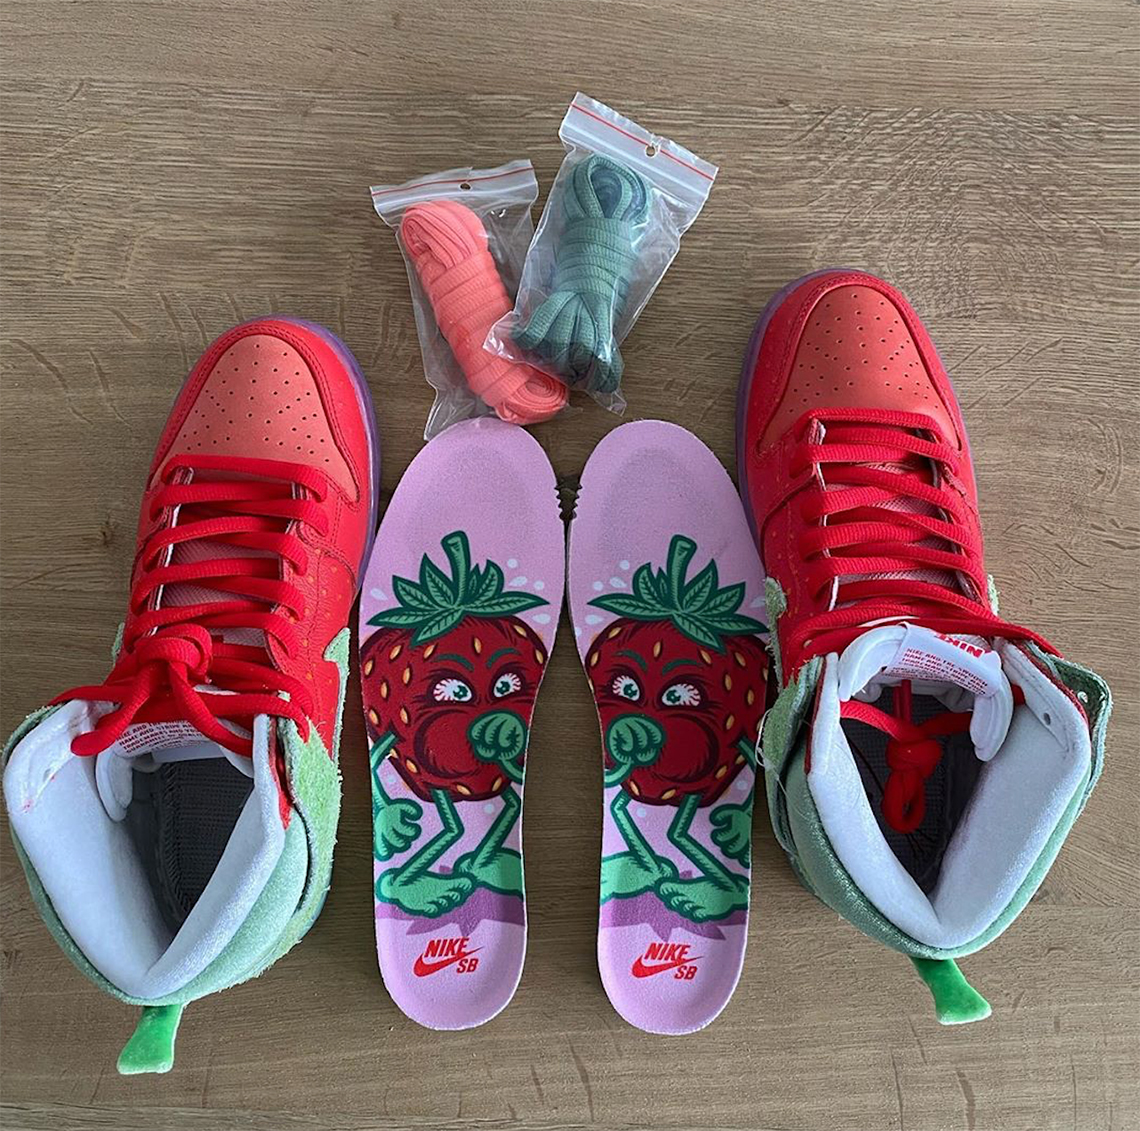 Nike SB Dunk High Strawberry Cough Release Info + Photos ...